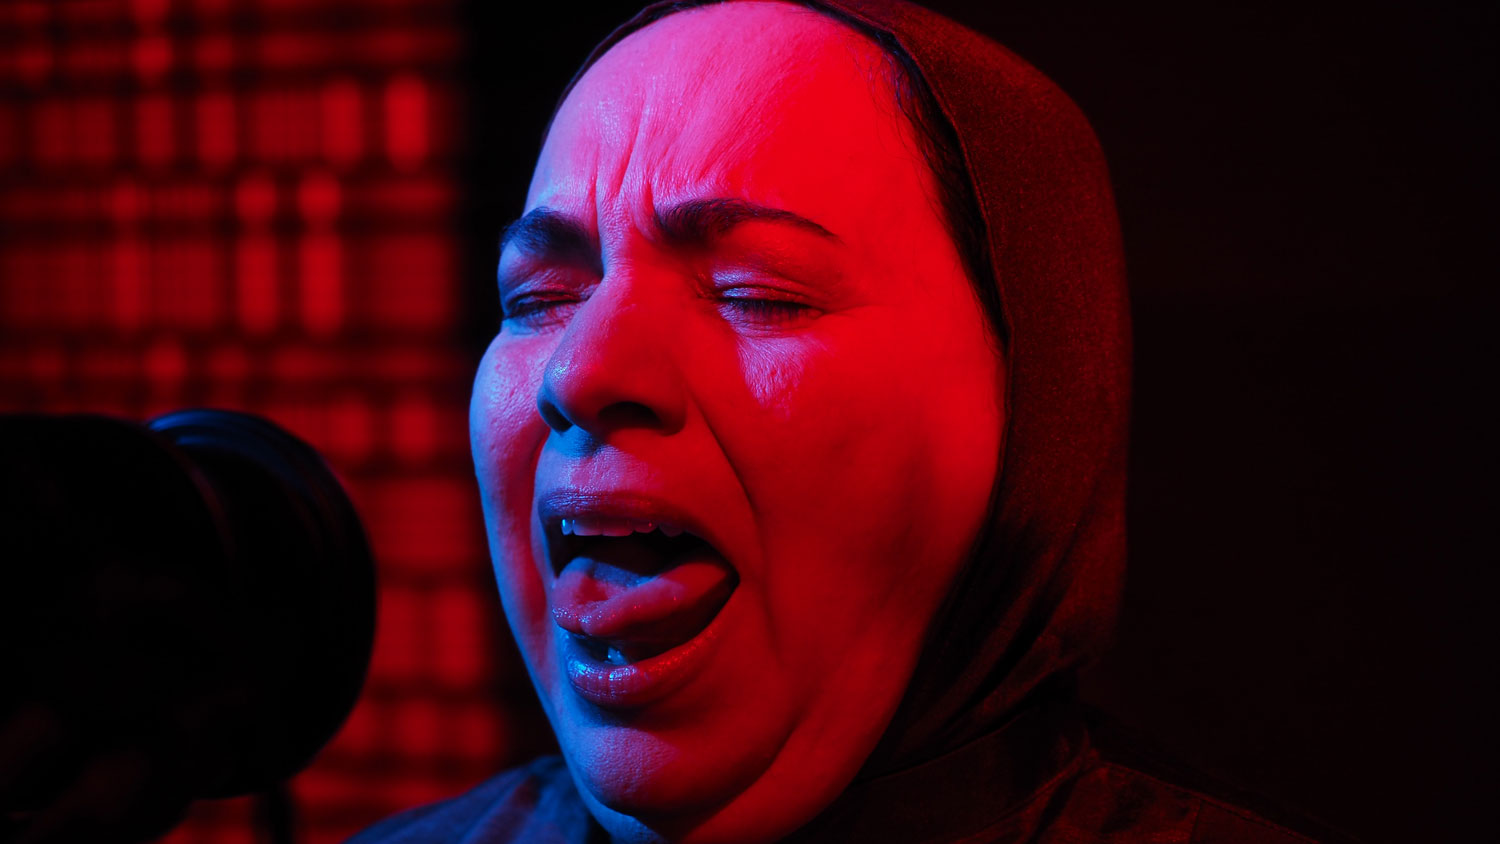 a muslim woman singing into a microphone washed in red light. 